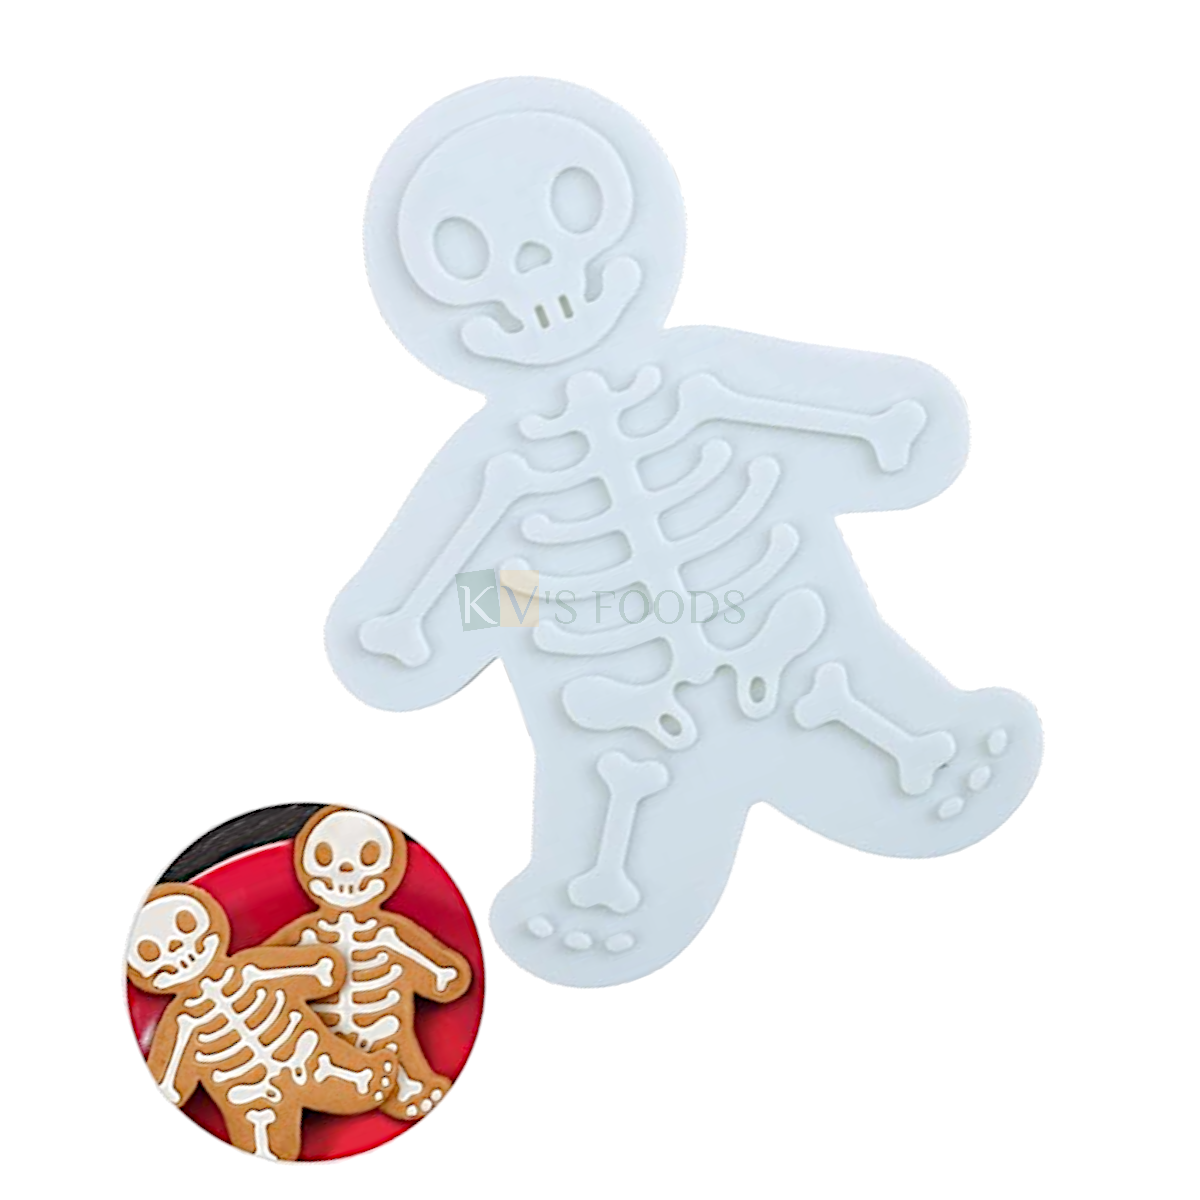 1 Pc White Big Christmas Ginger Bread Men SKull Cookie Cutter Molds Sandwitch Fondant Cutters, Skeleton Man Cakes Biscuits Chocolates Cheese Cutter Birthday Christmas Tree Parties Halloween Decoration